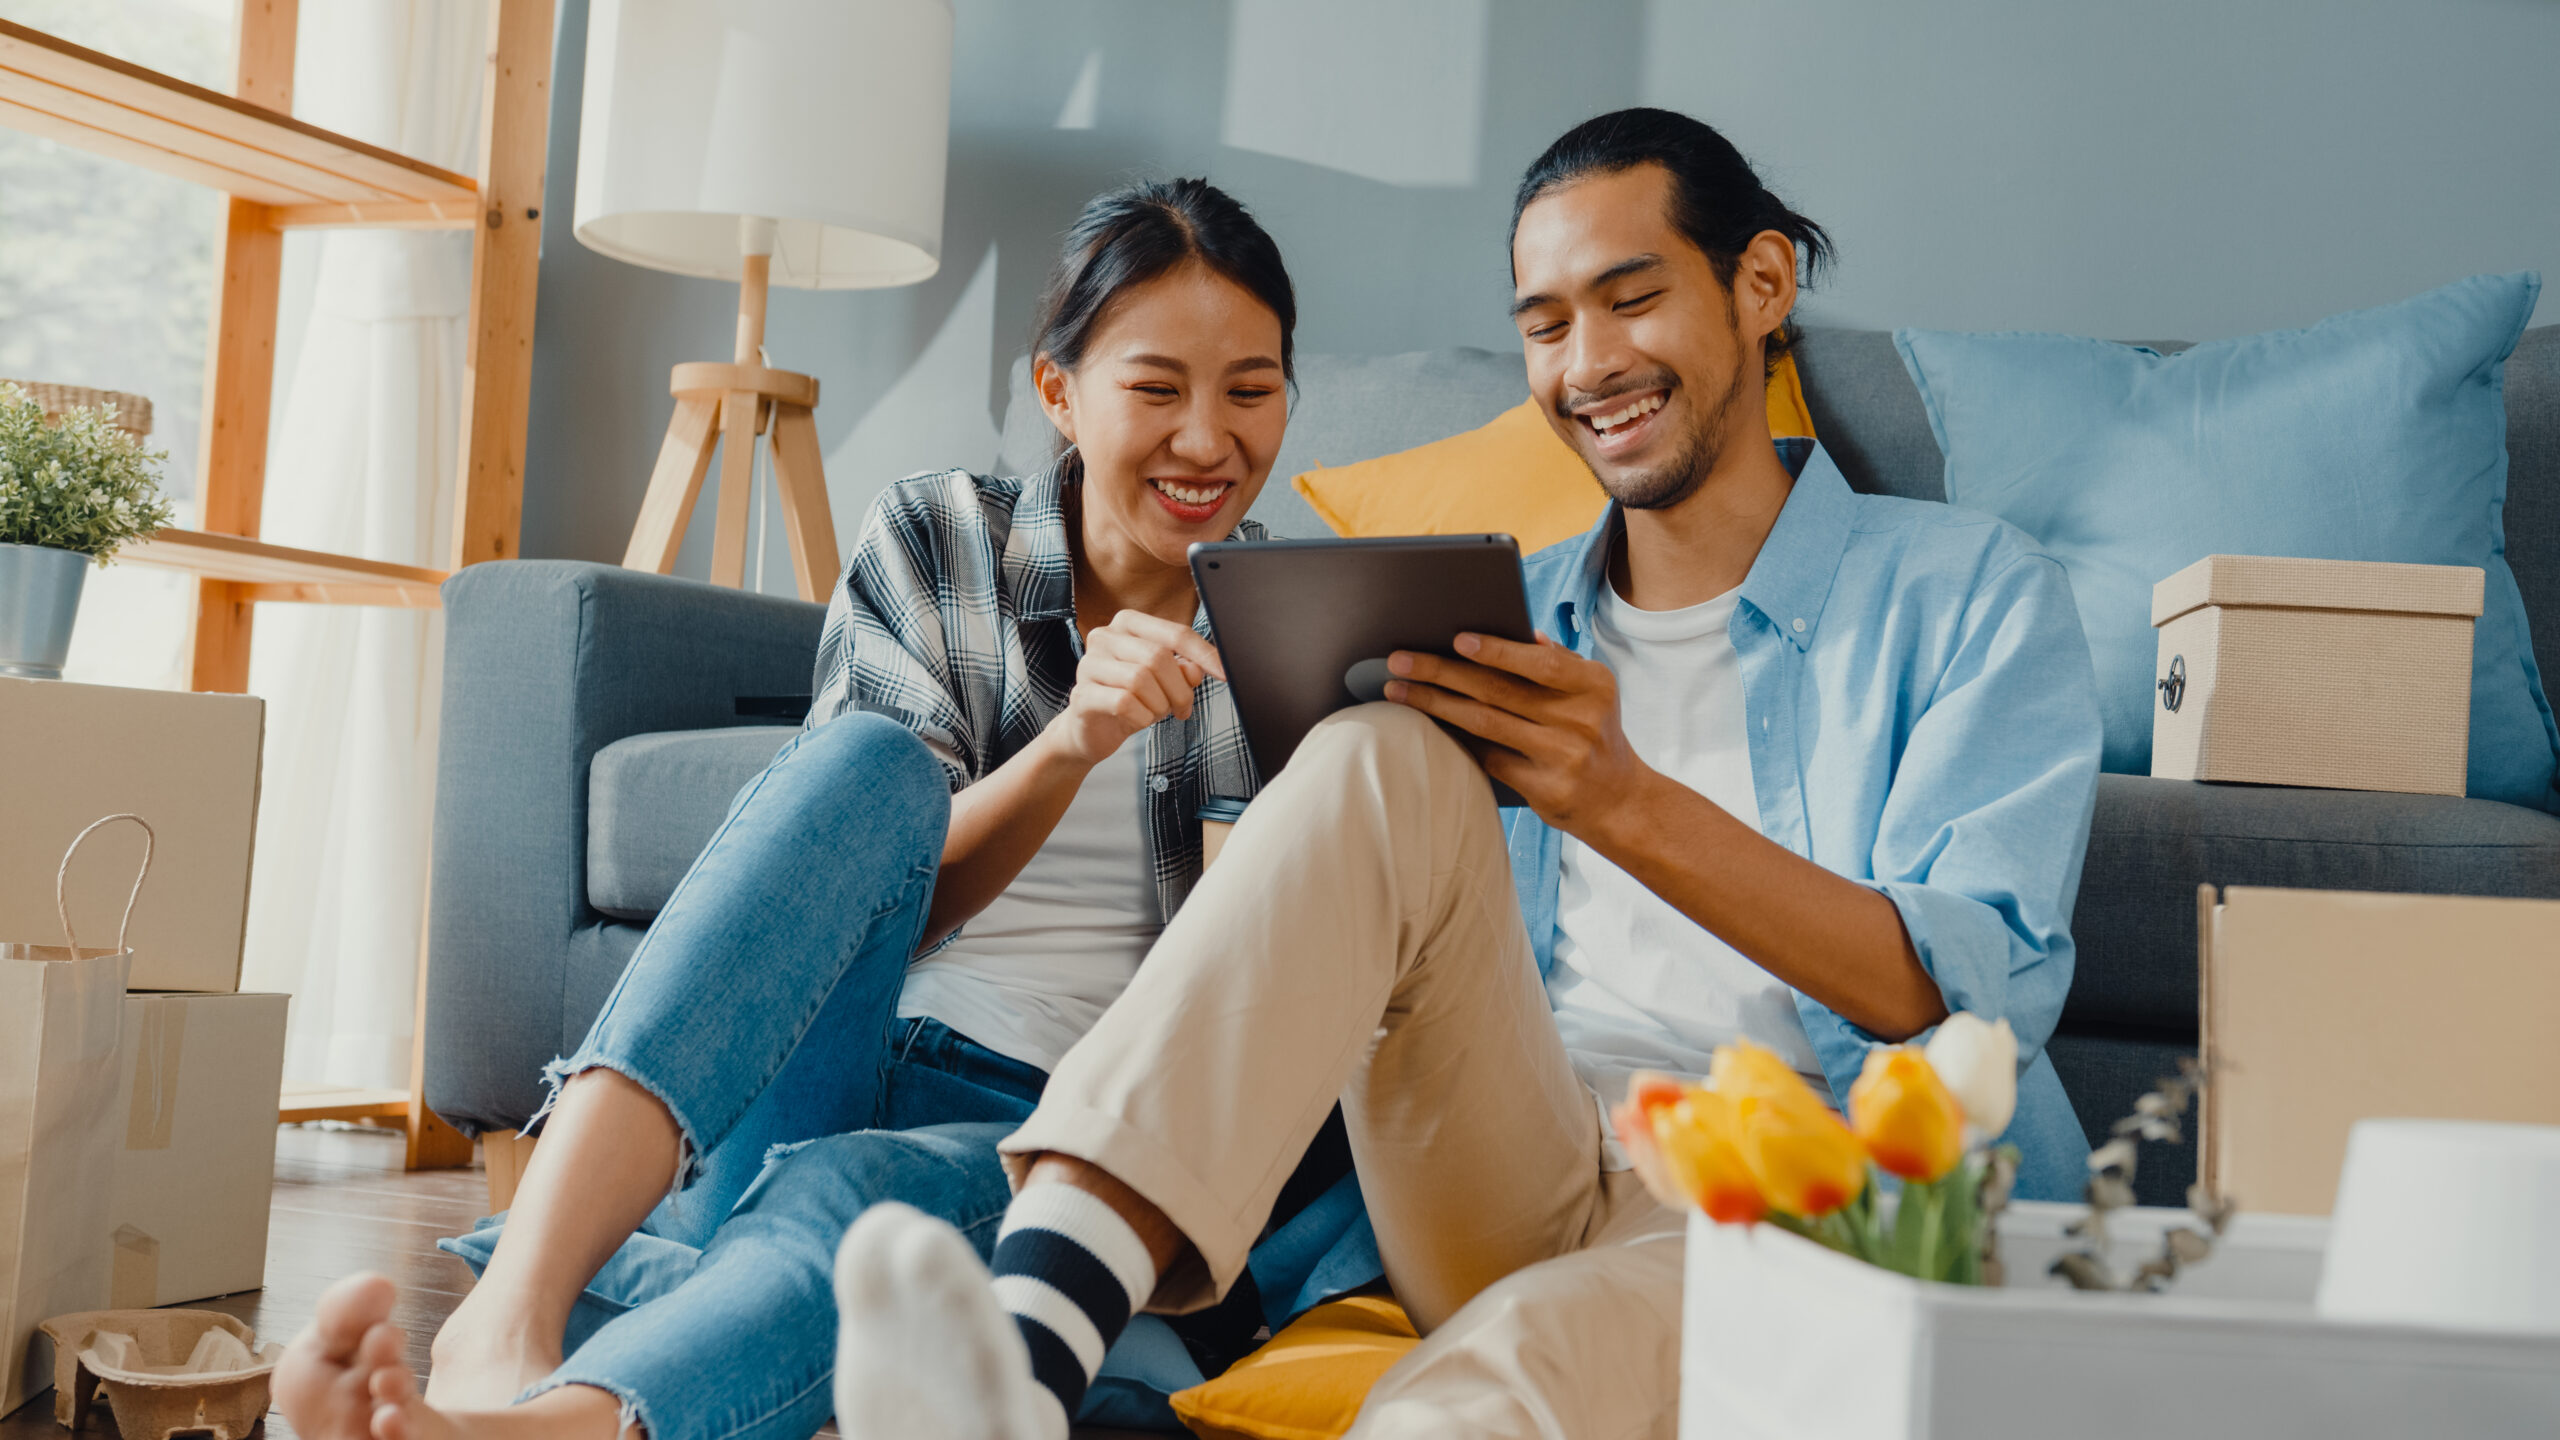 Is your business retail ready? Find out and learn how advertising with Walmart Connect can help unlock accelerated growth